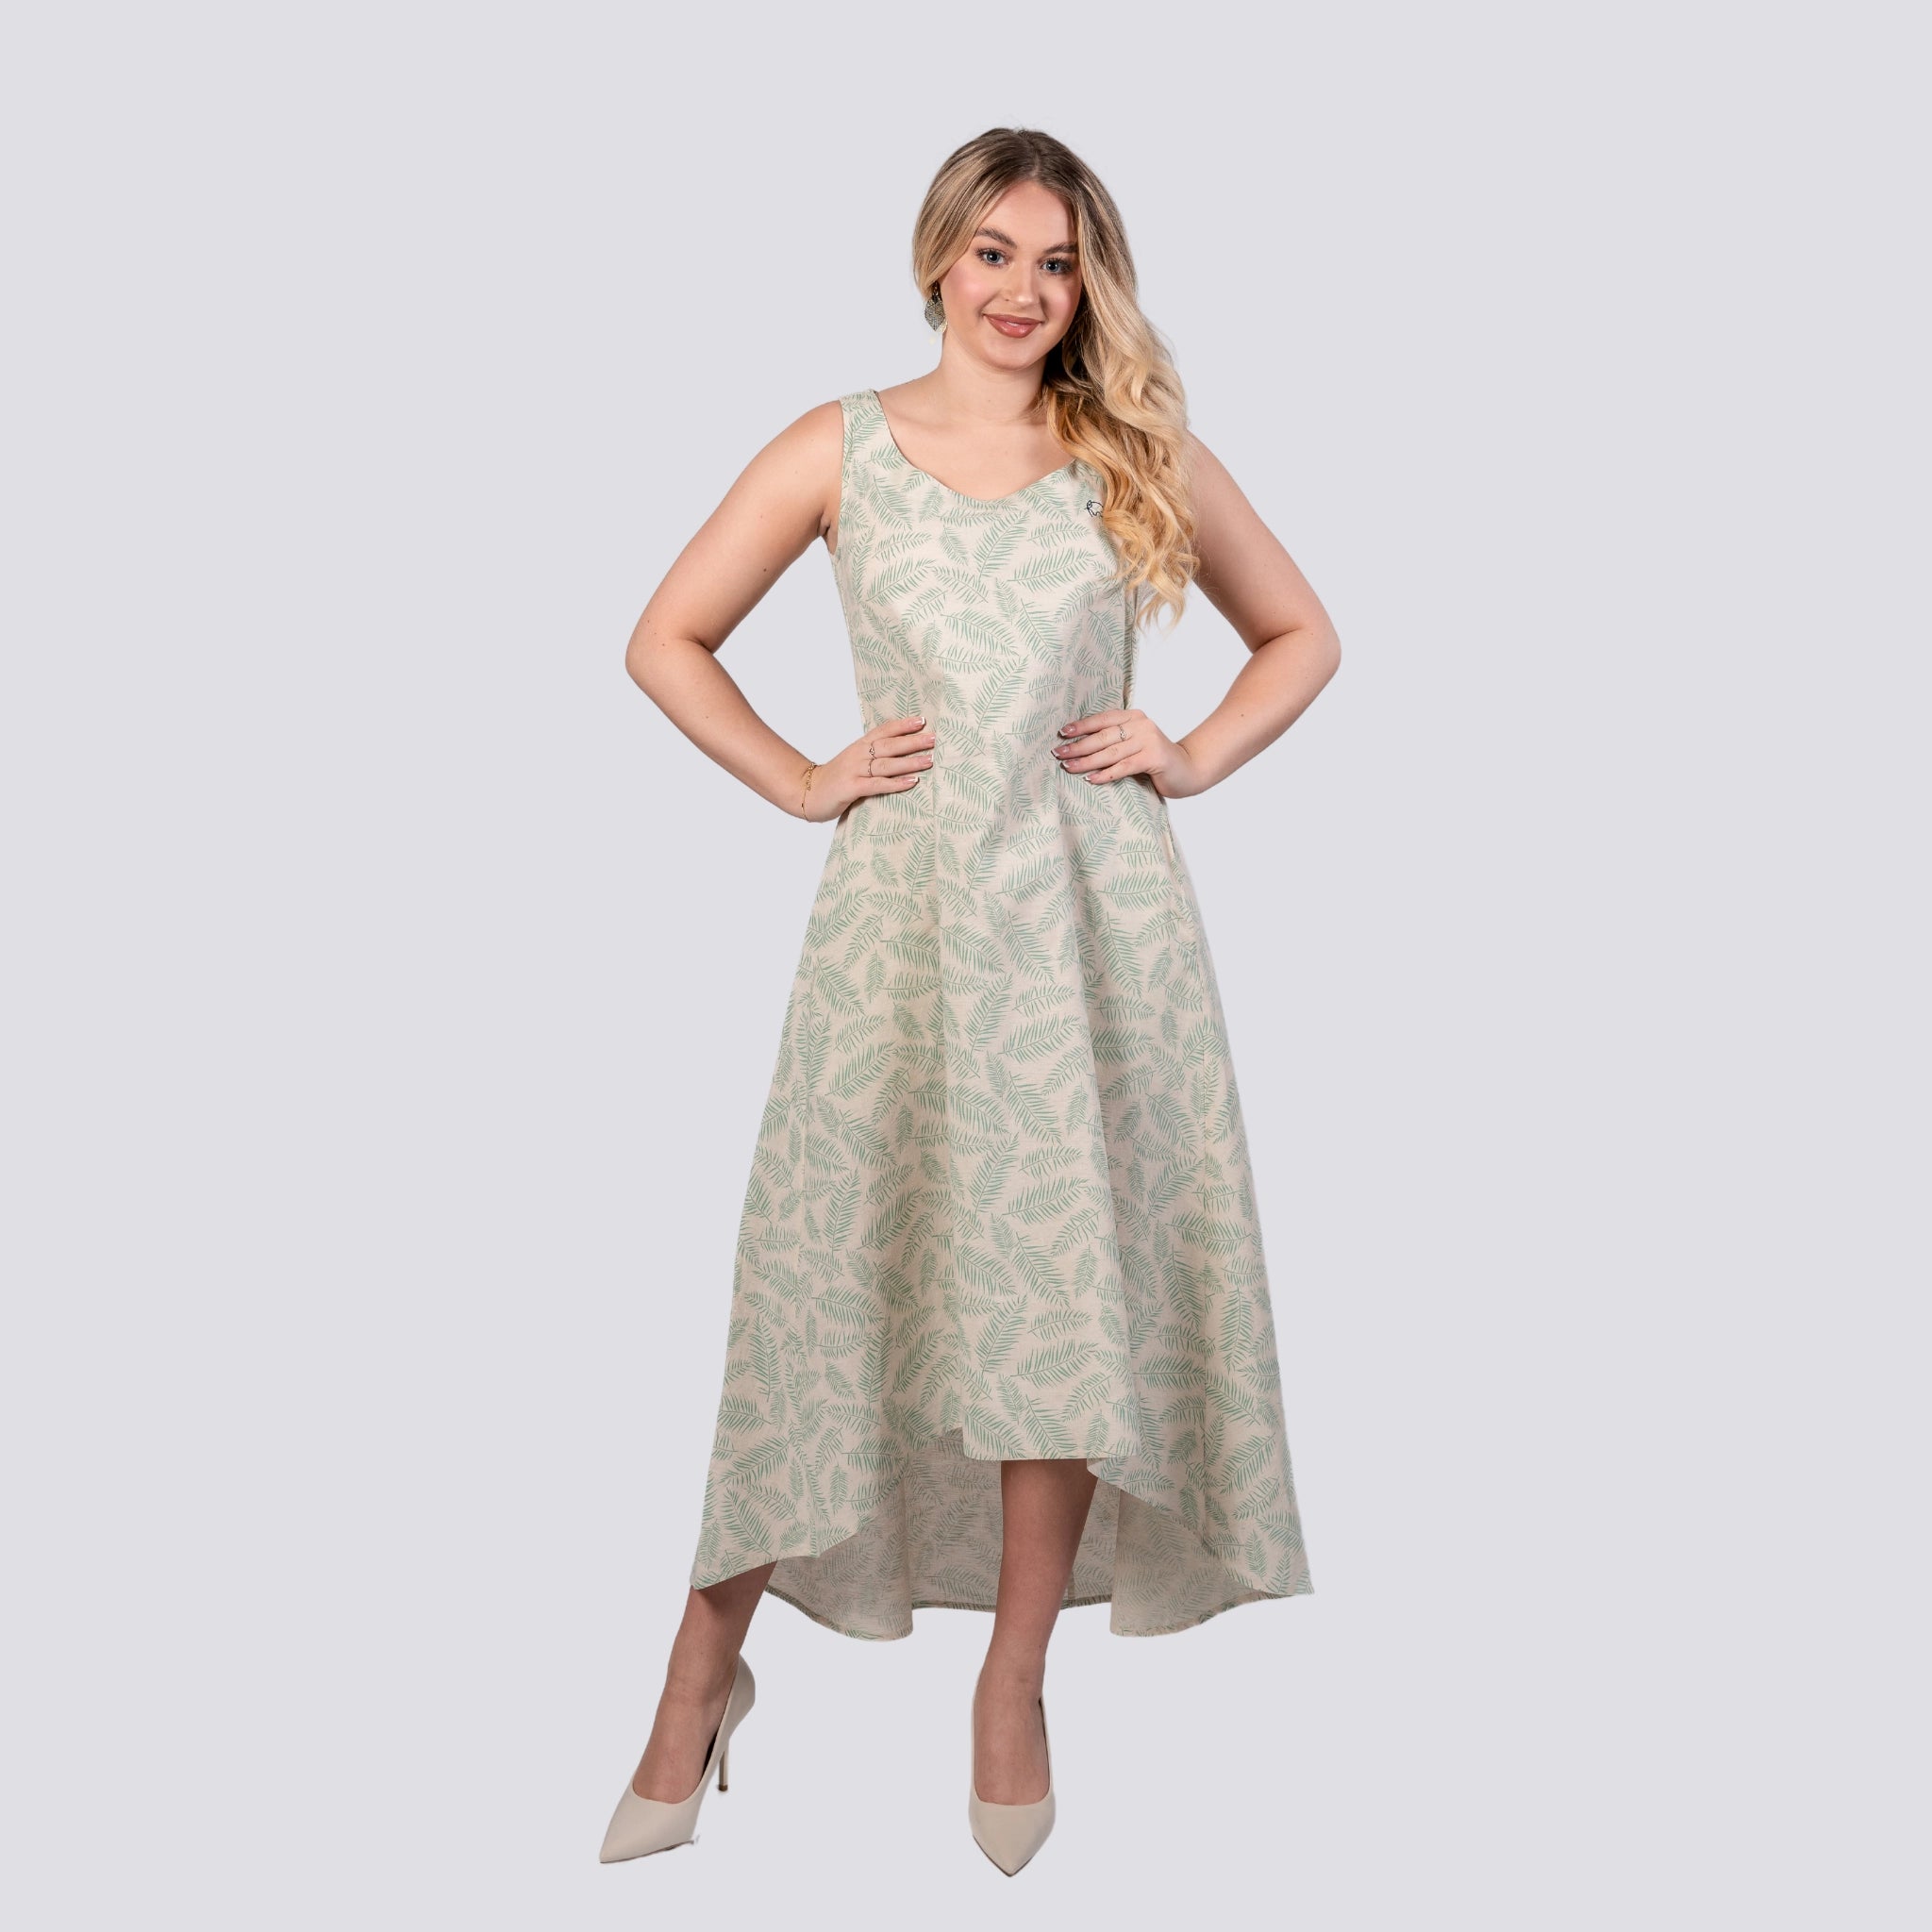 Woman in an elegant sleeveless U-neck leaf-patterned Mystic Breeze High Low Linen Cotton Midi Dress by Karee and white heels, standing with hands on hips, smiling against a light grey background.